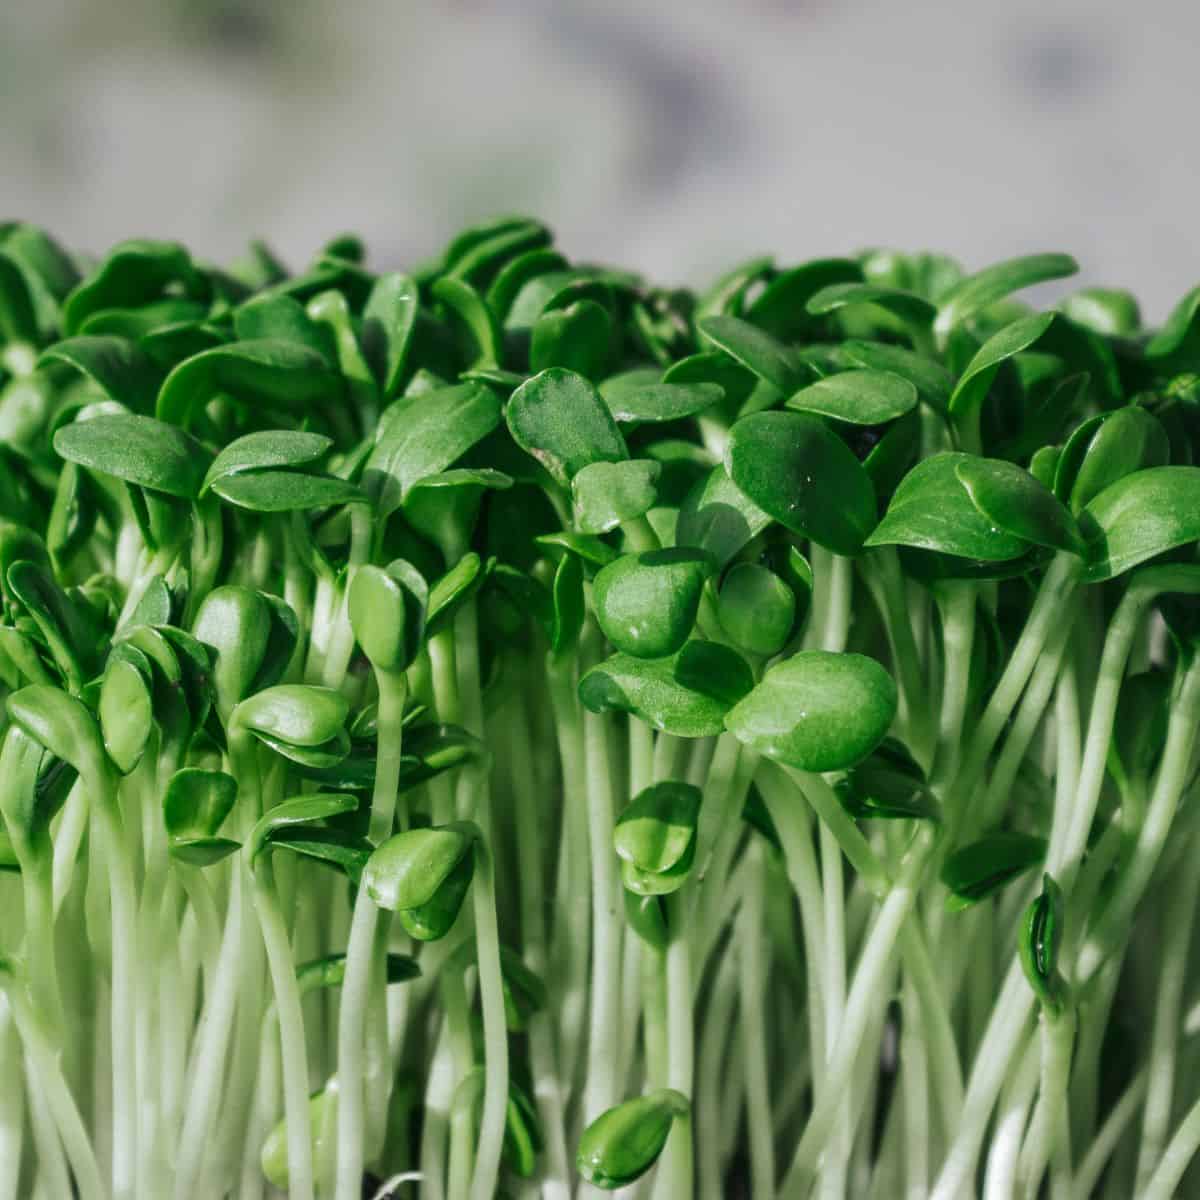 A close up of the best green sprouts growing in a pot.